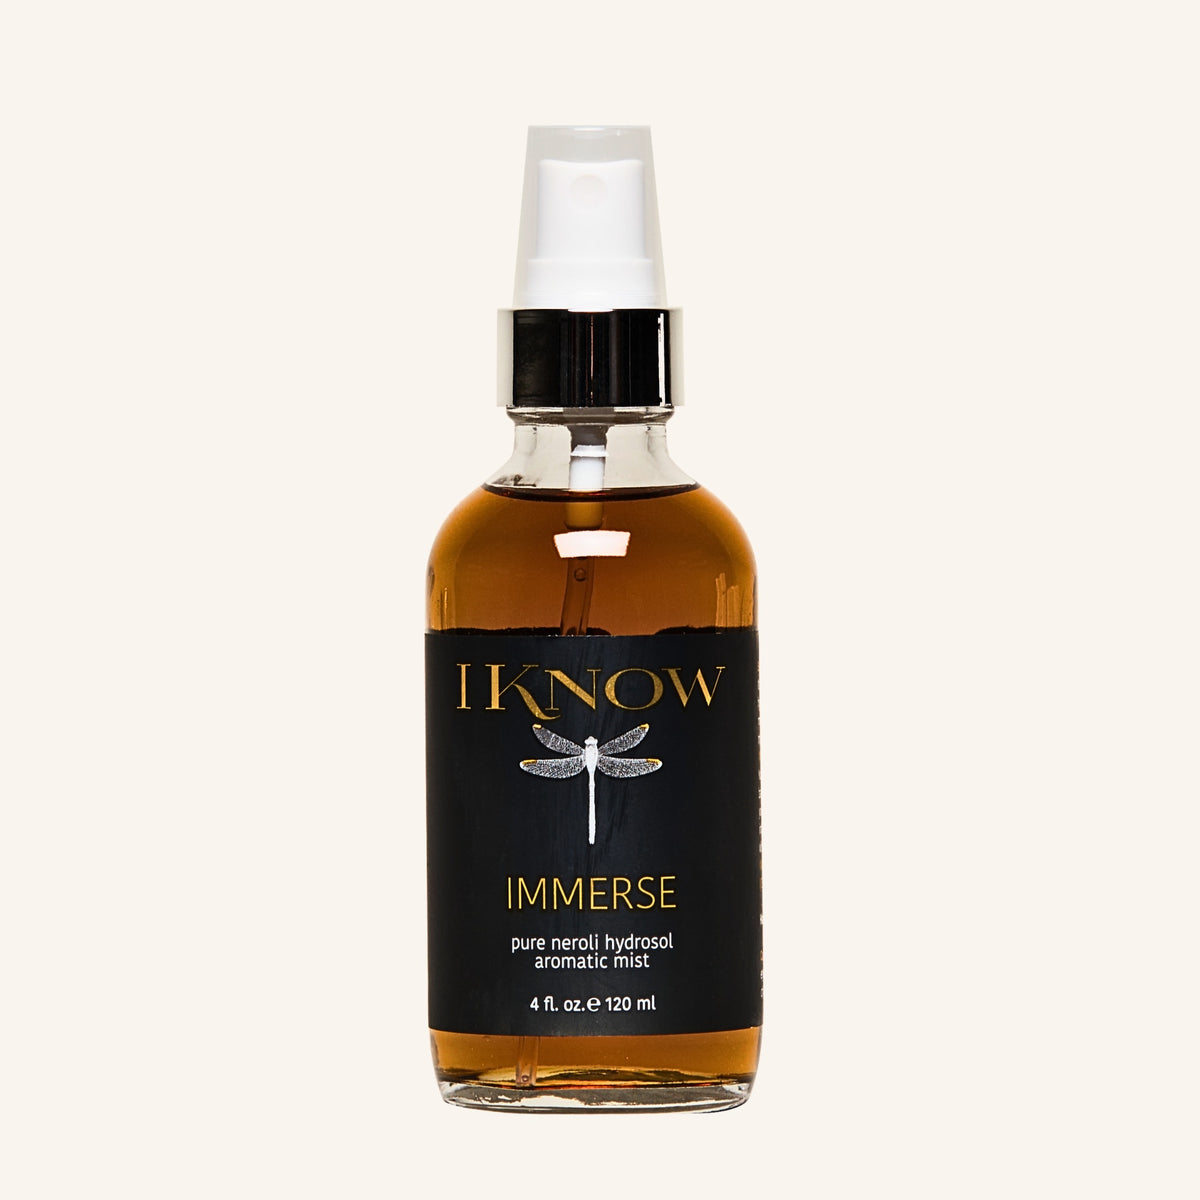 IKNOW Immerse Pure Neroli Oil Mist helps tone, balance and calm skin